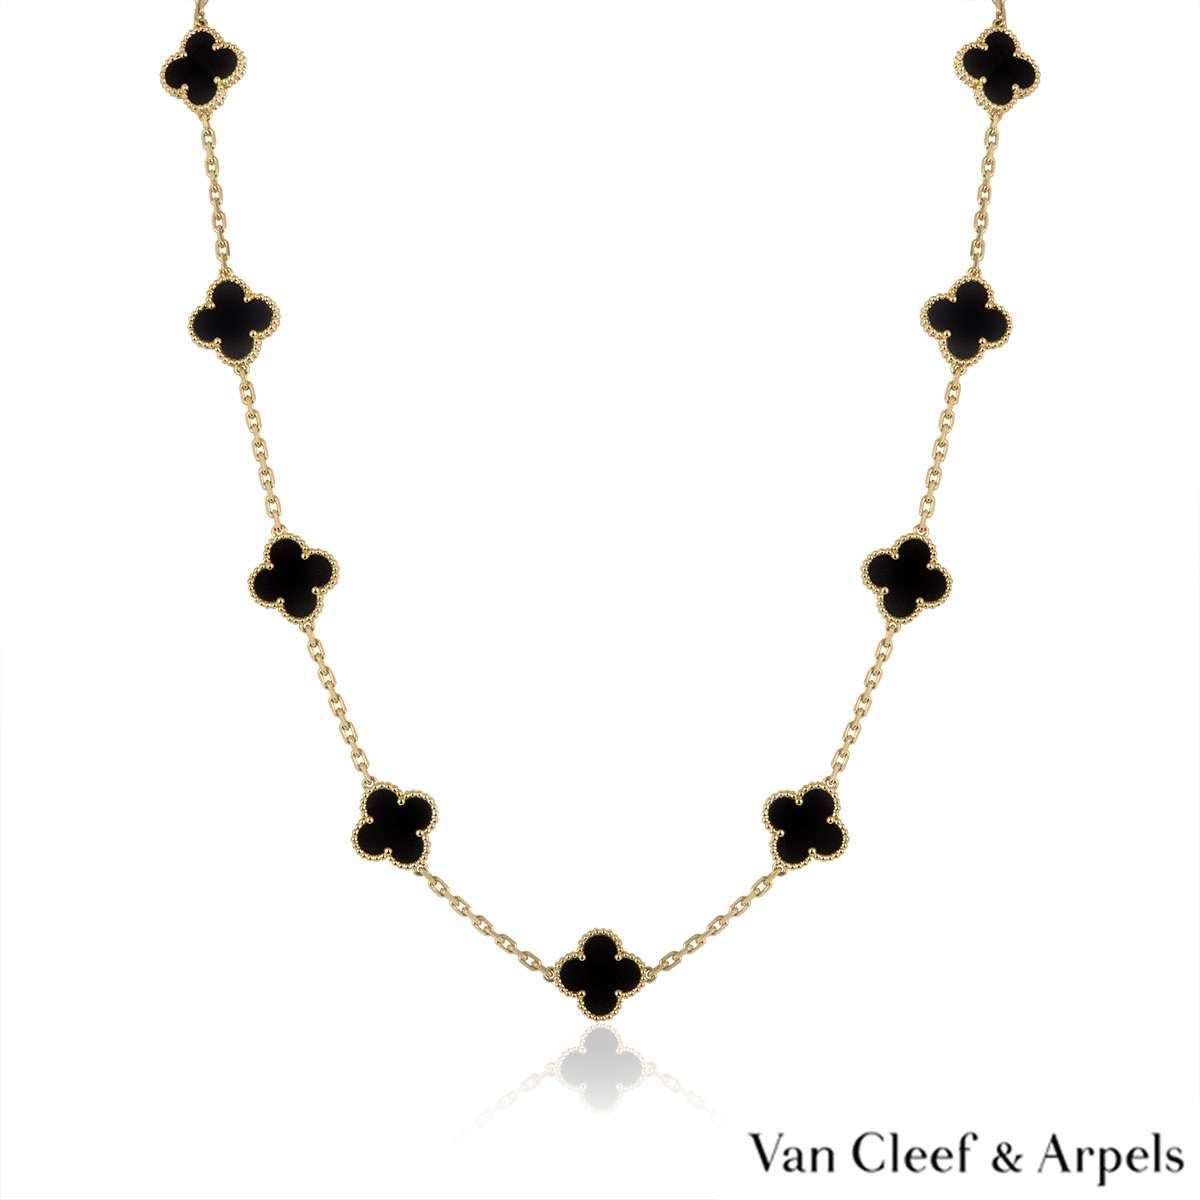 An 18k yellow gold necklace by Van Cleef & Arpels from the Vintage Alhambra collection. The necklace features 20 iconic 4 leaf clover motifs, each set with a beaded edge and an onyx inlay, set throughout the length of the chain. The trace link